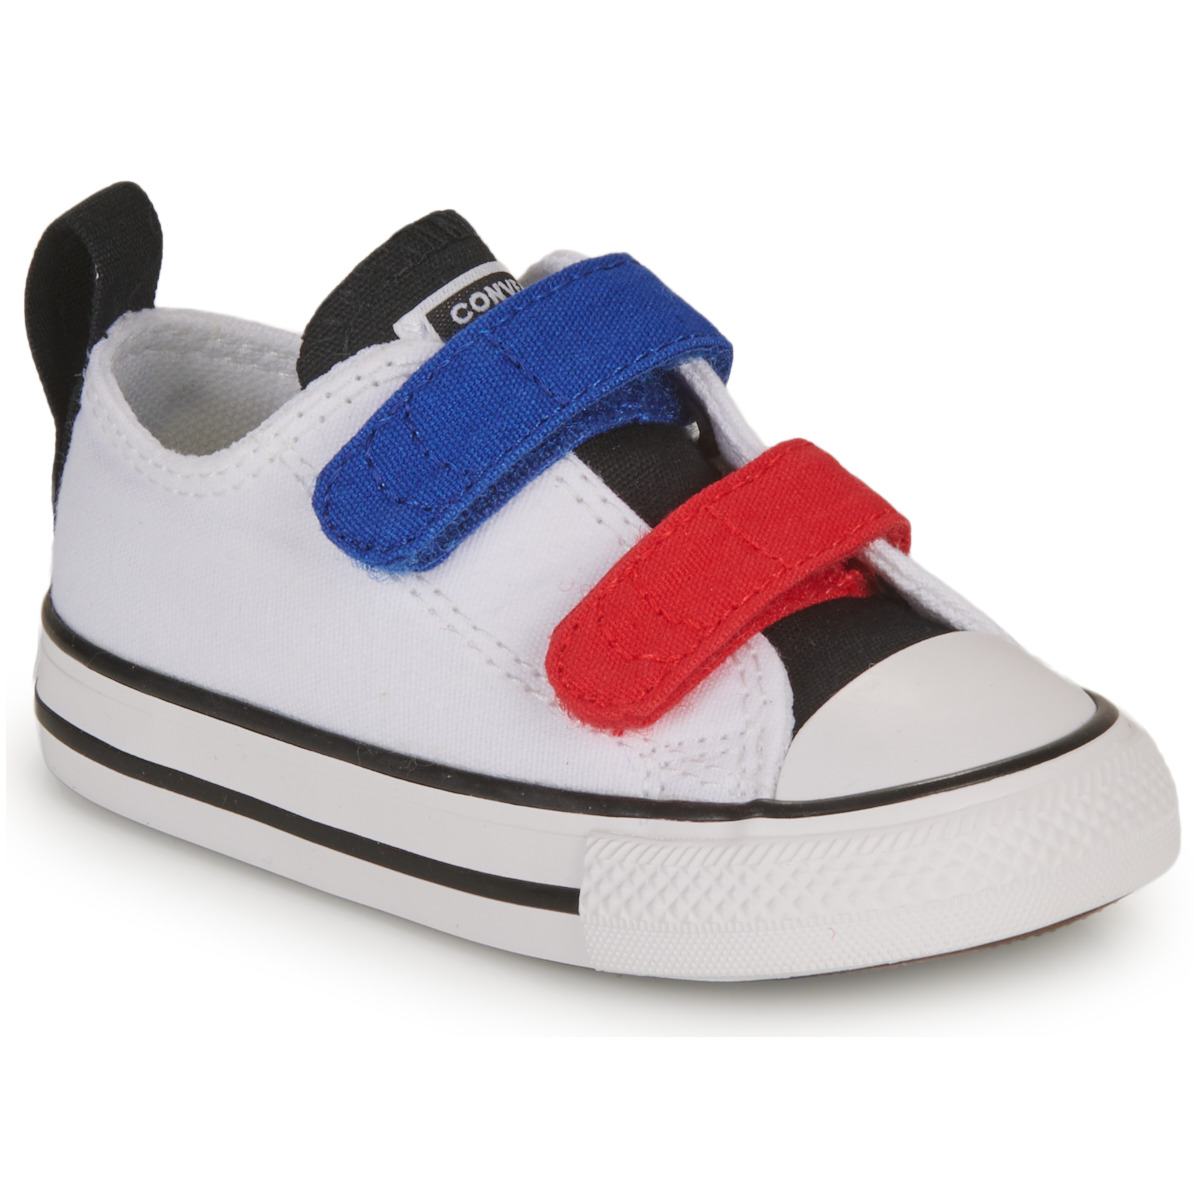 Converse Blanc / Bleu / Rouge INFANT CONVERSE CHUCK TAYLOR ALL STAR 2V EASY-ON SUMMER TWILL LO 4248UVgY